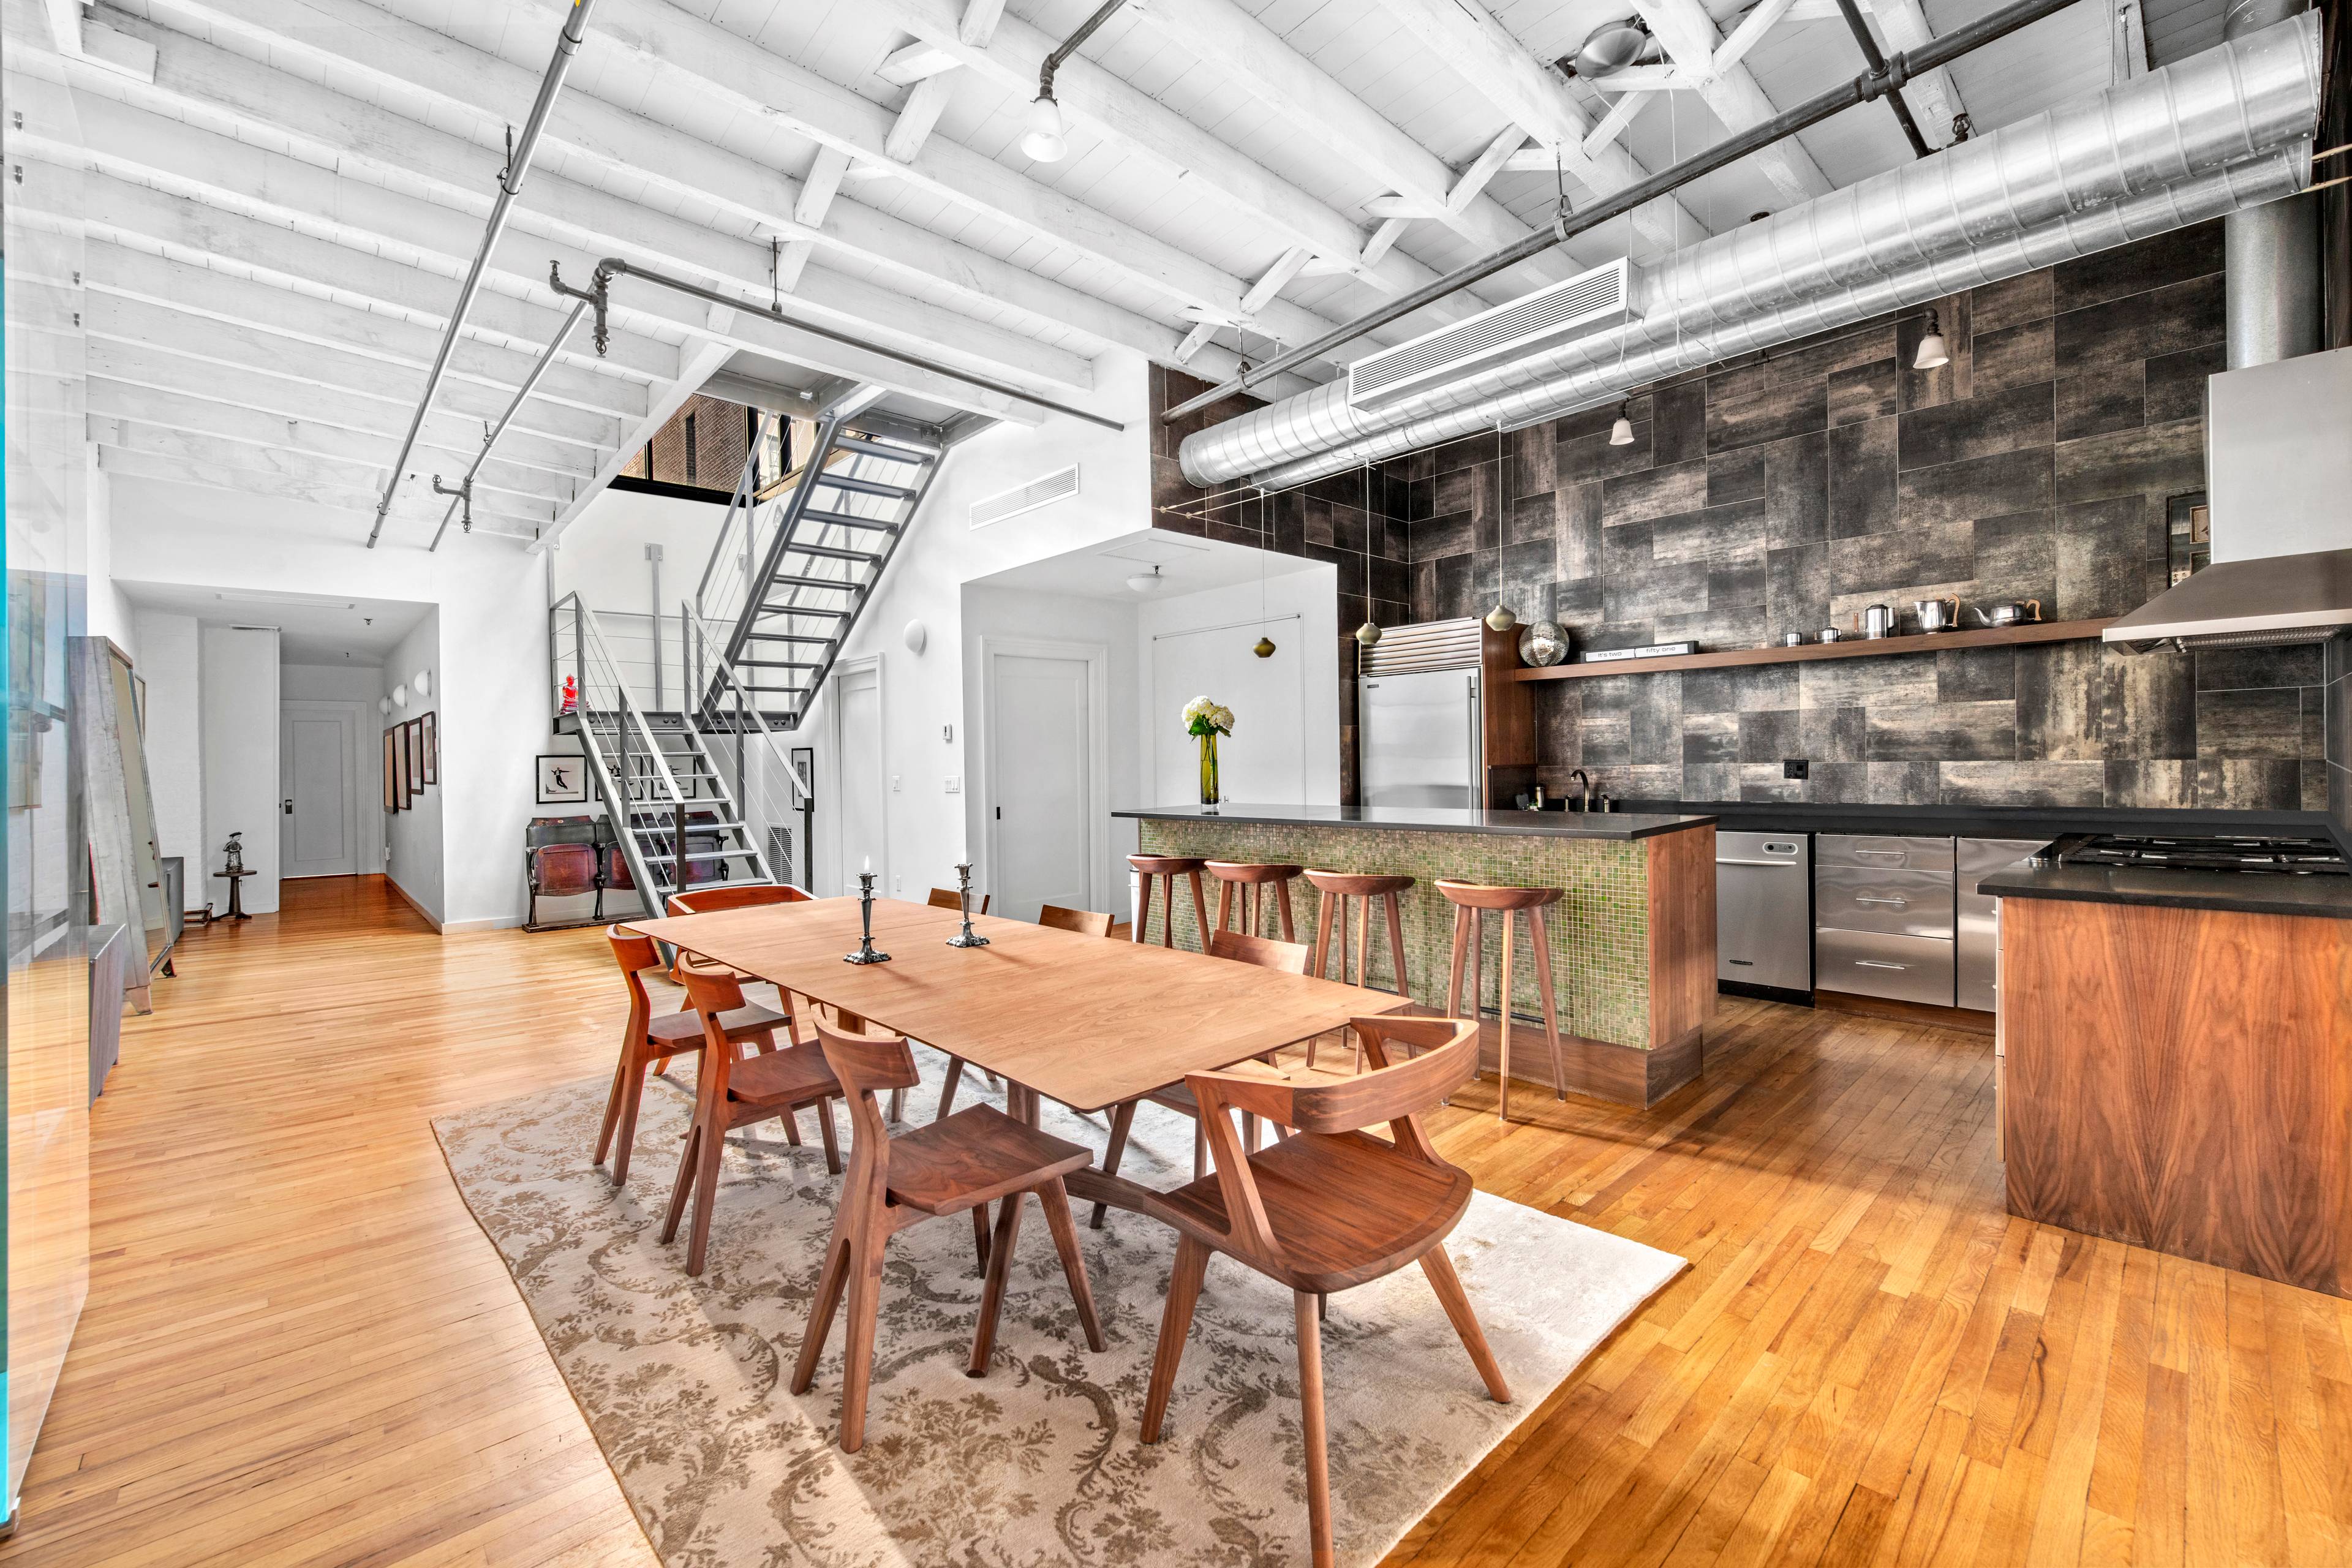 Welcome to the penthouse at 41 Murray and to true TriBeCa loft living.